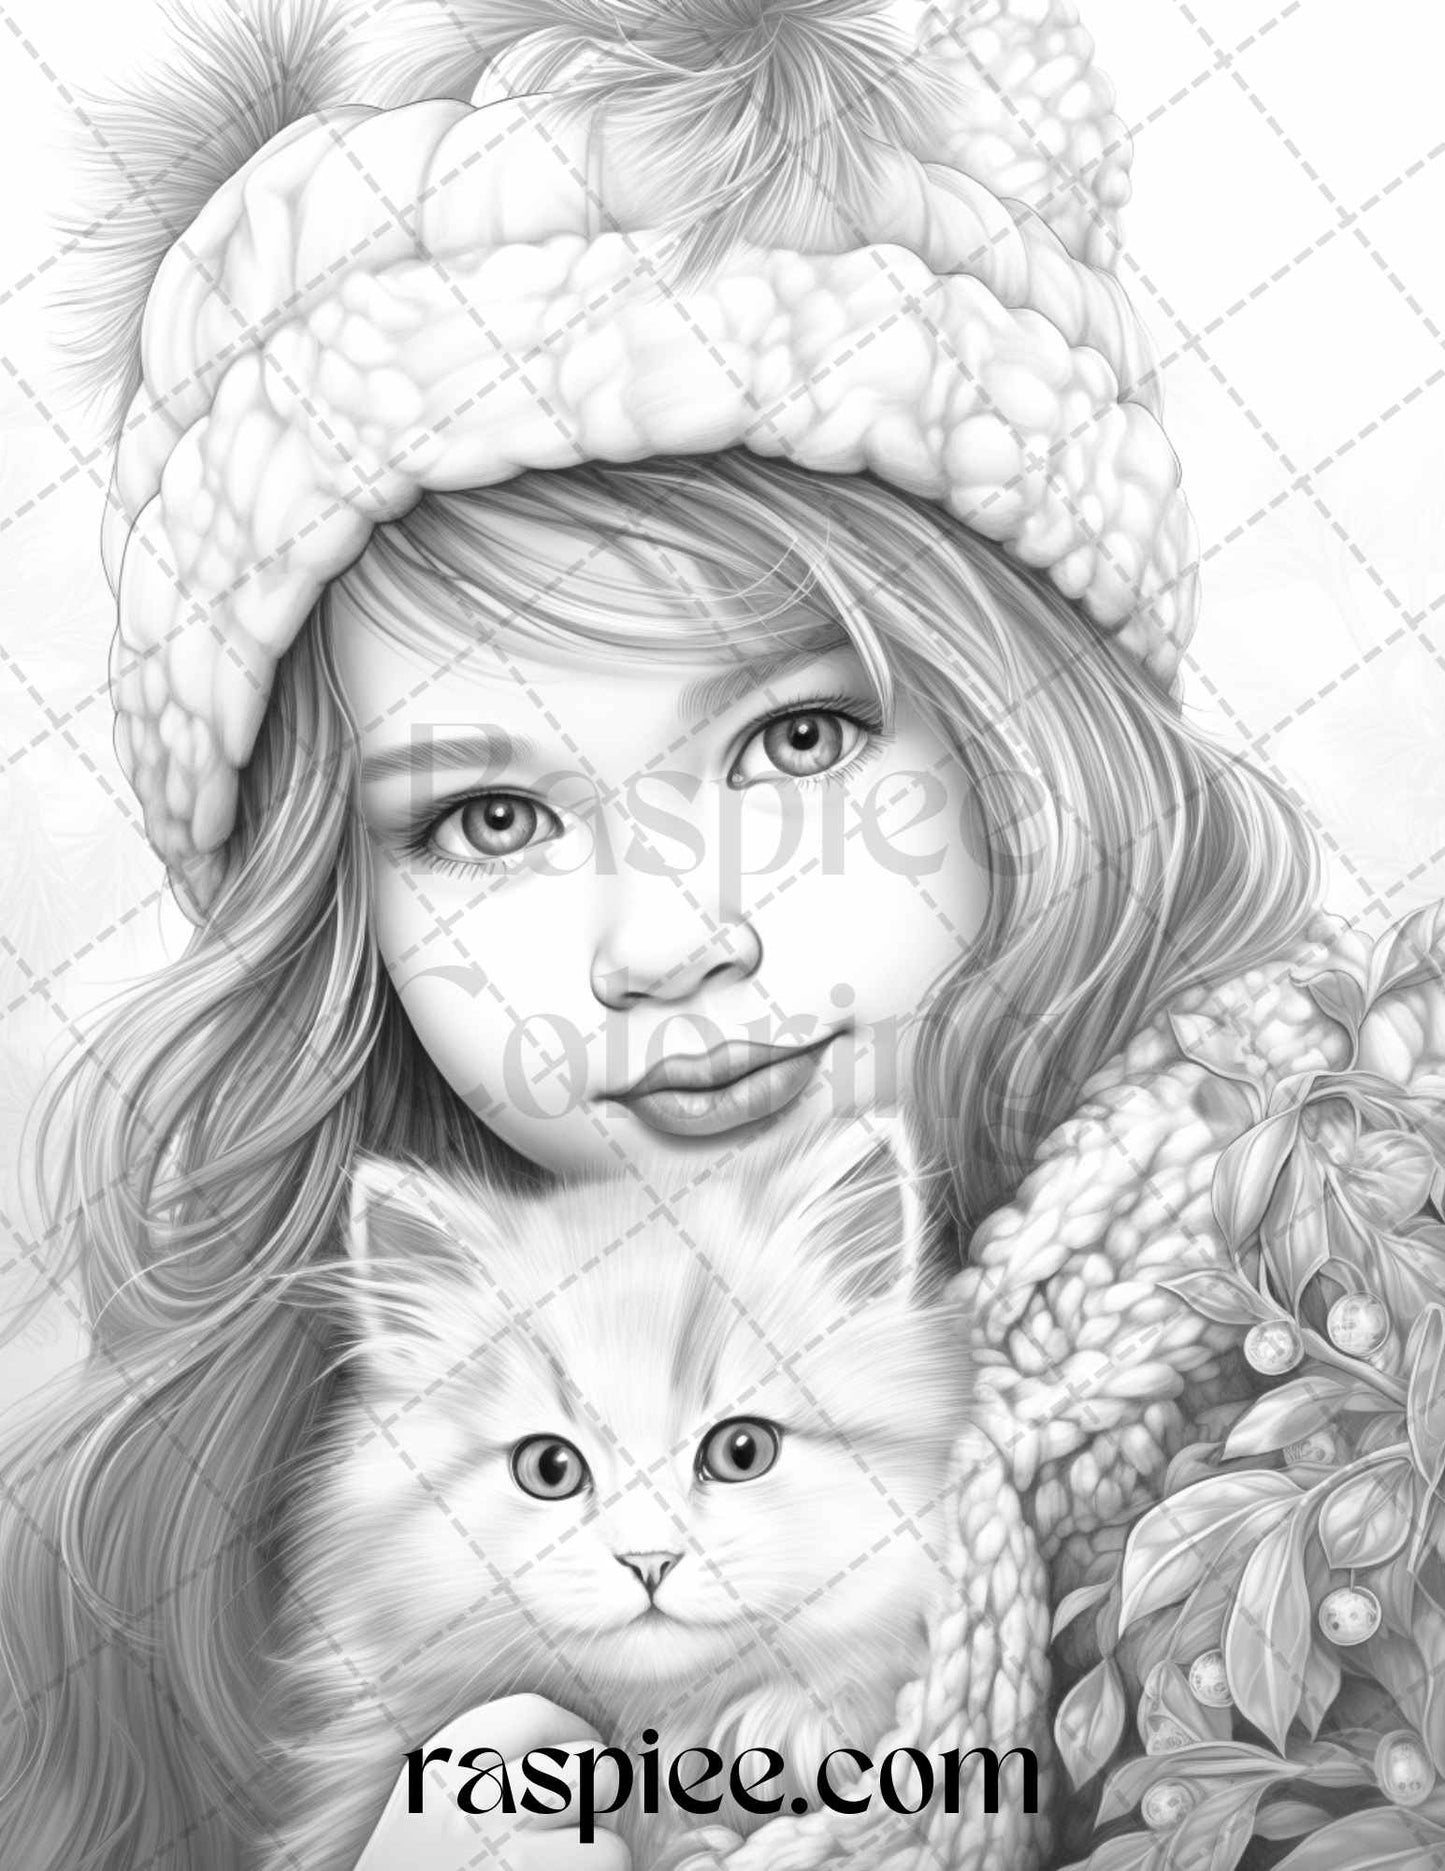 60 Beautiful Winter Girls Grayscale Coloring Pages Printable for Adults, PDF File Instant Download - raspiee